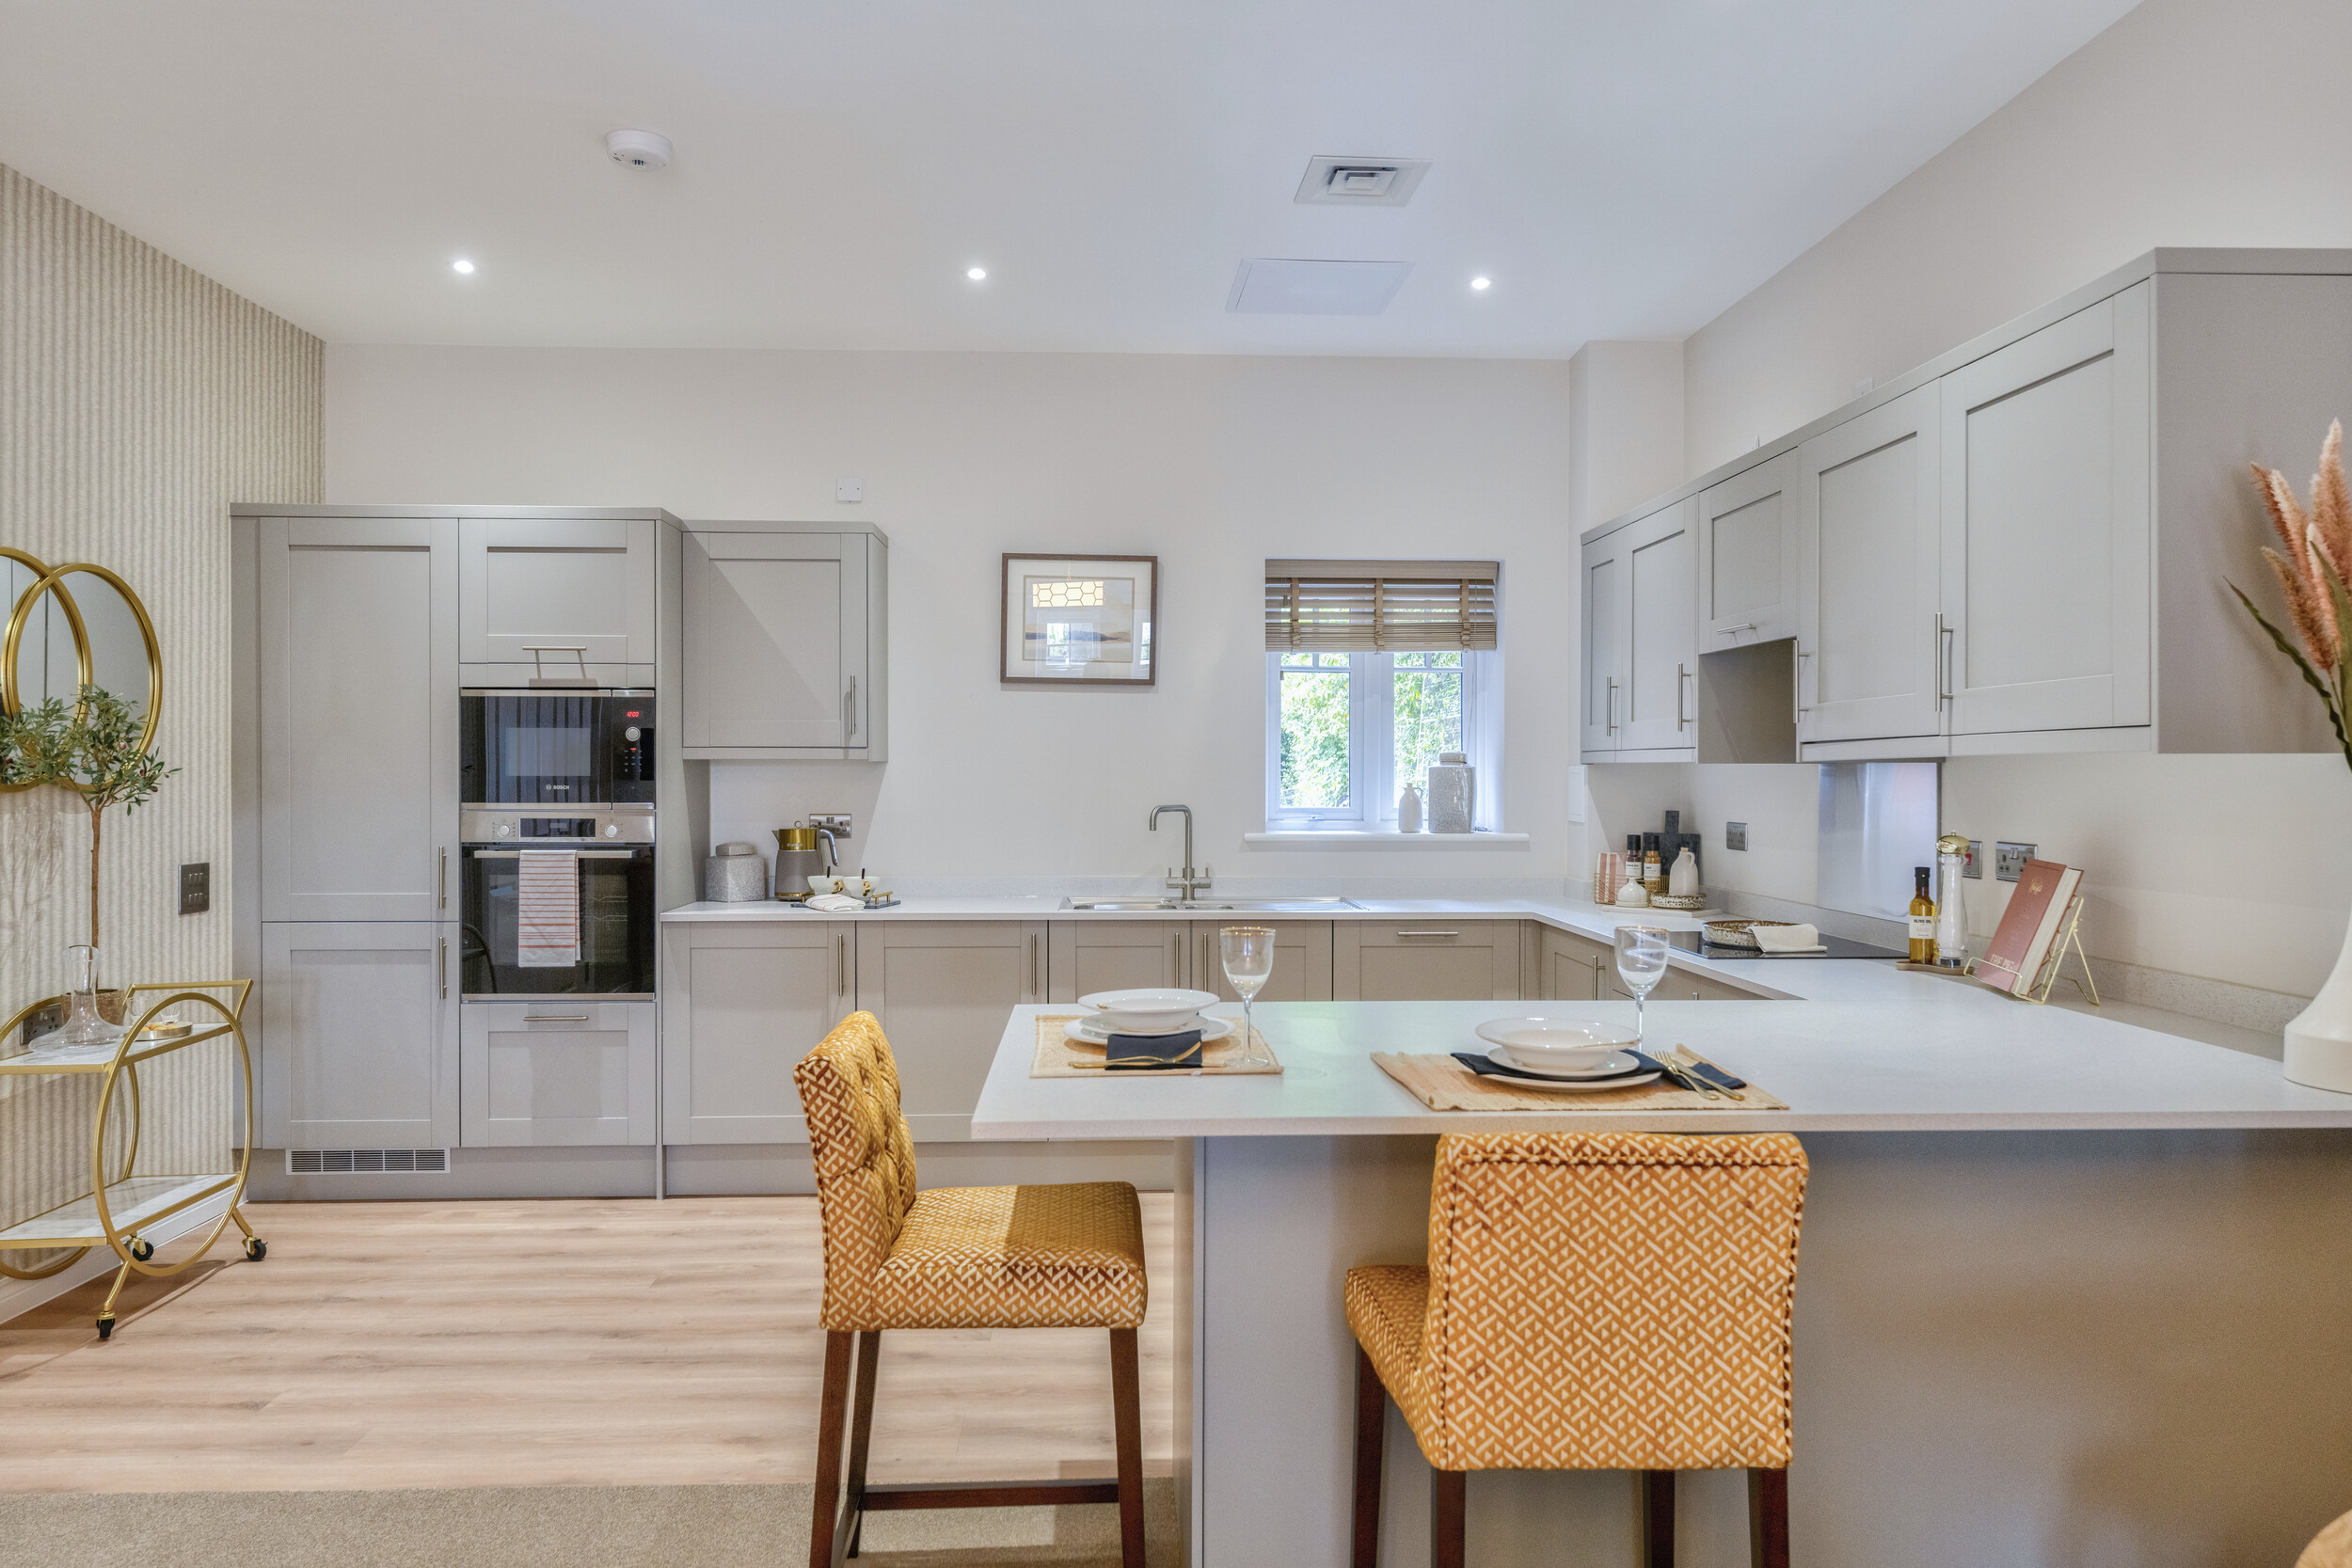 Luxury Kitchens - New Retirement Apartments in Moseley